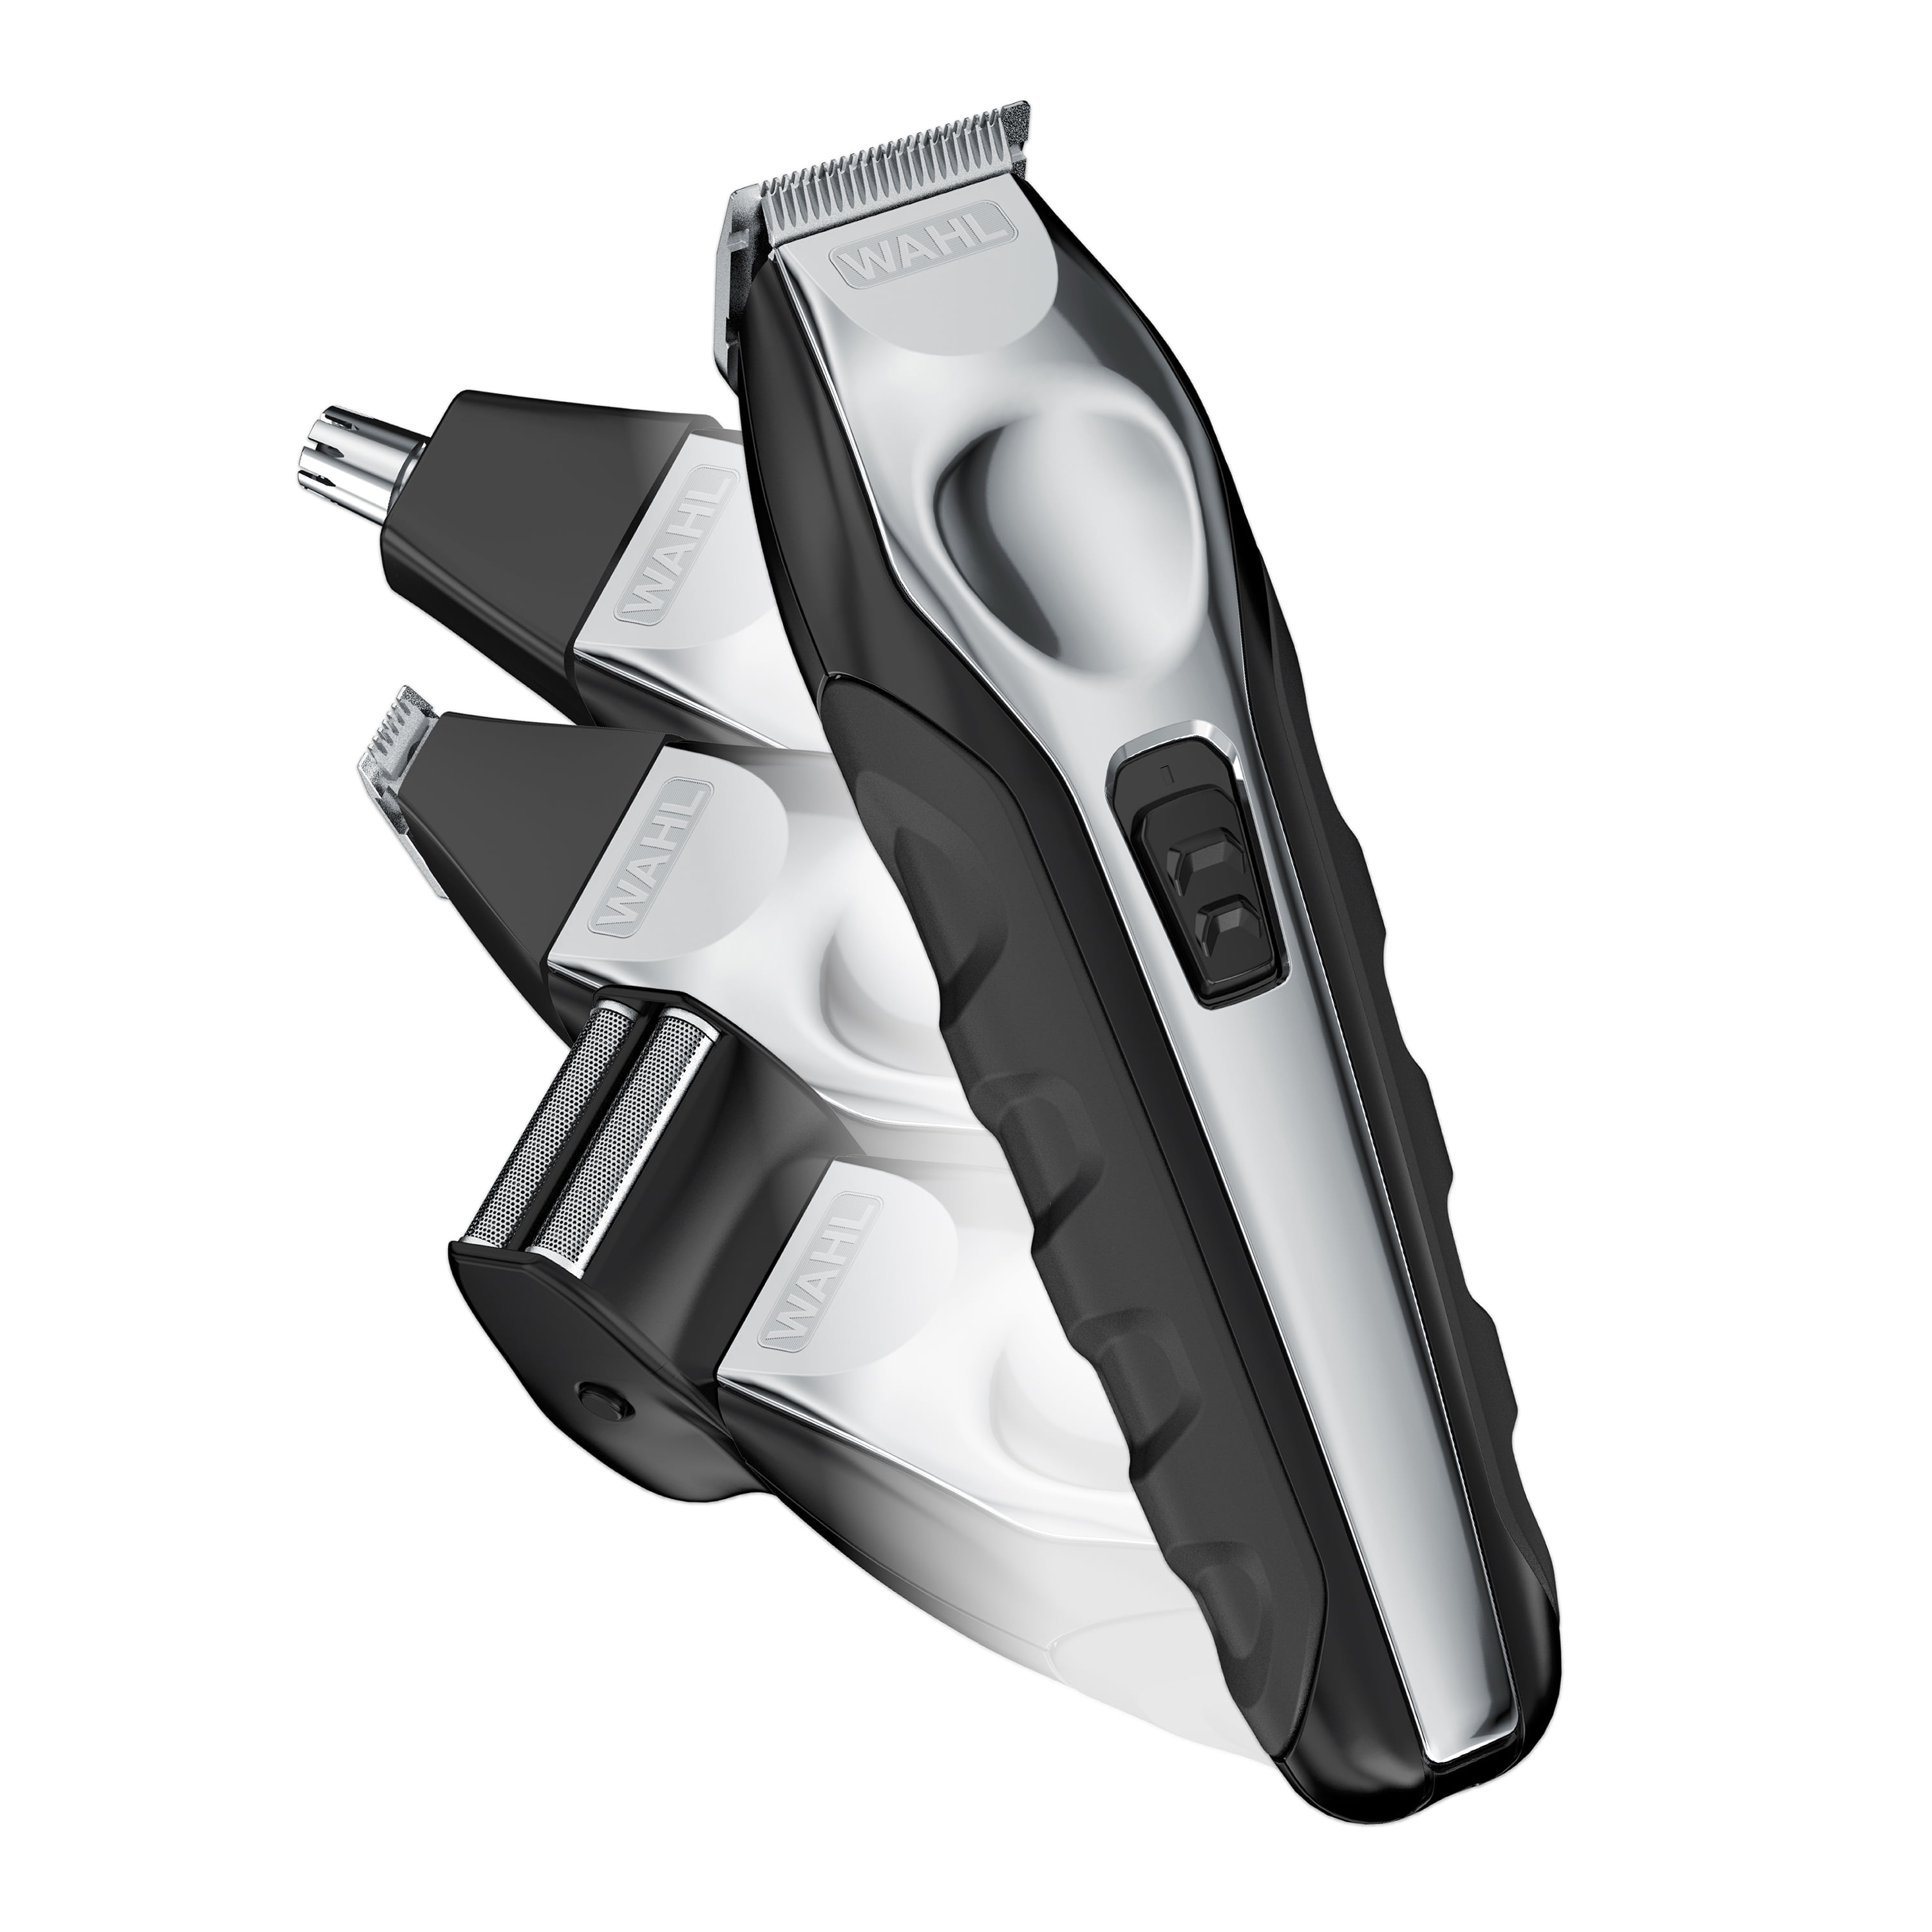 Wahl Lithium Ion All-in-One Trimmer - Black/Silver Model 9888-600